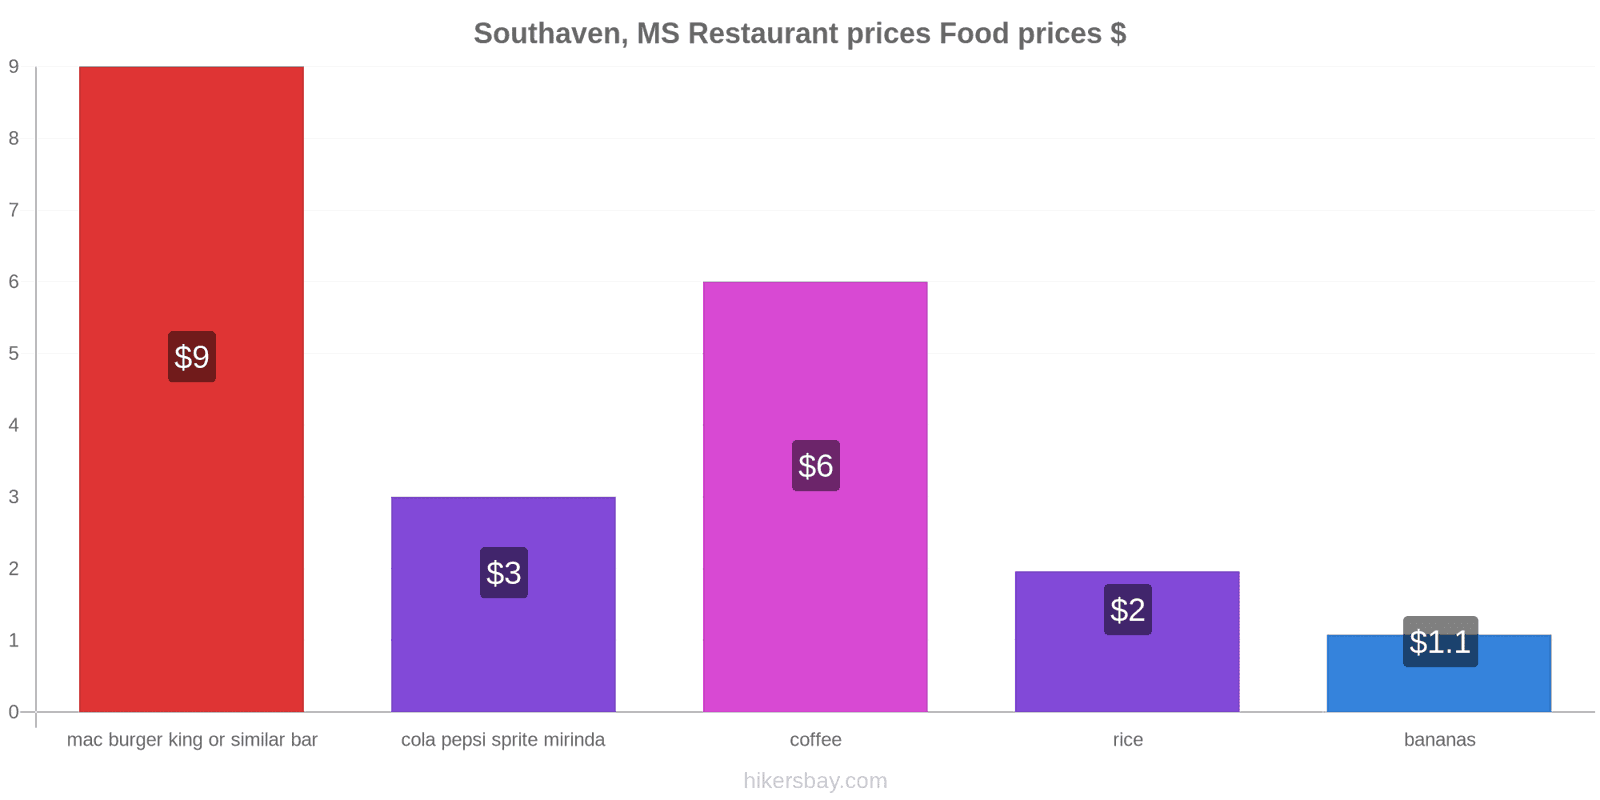 Southaven, MS price changes hikersbay.com